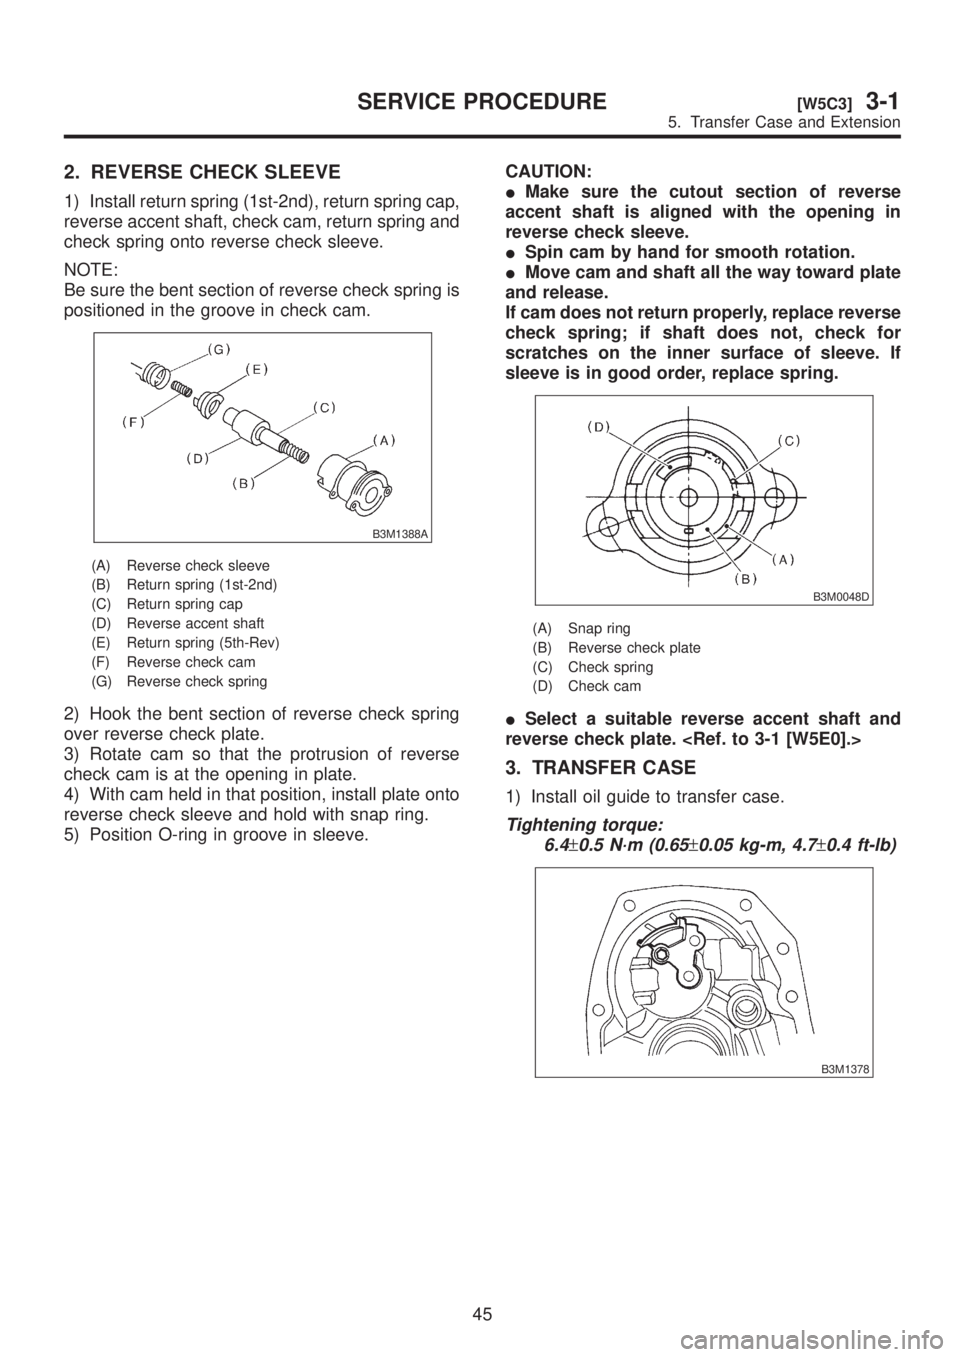 SUBARU LEGACY 1999  Service Repair Manual 2. REVERSE CHECK SLEEVE
1) Install return spring (1st-2nd), return spring cap,
reverse accent shaft, check cam, return spring and
check spring onto reverse check sleeve.
NOTE:
Be sure the bent section